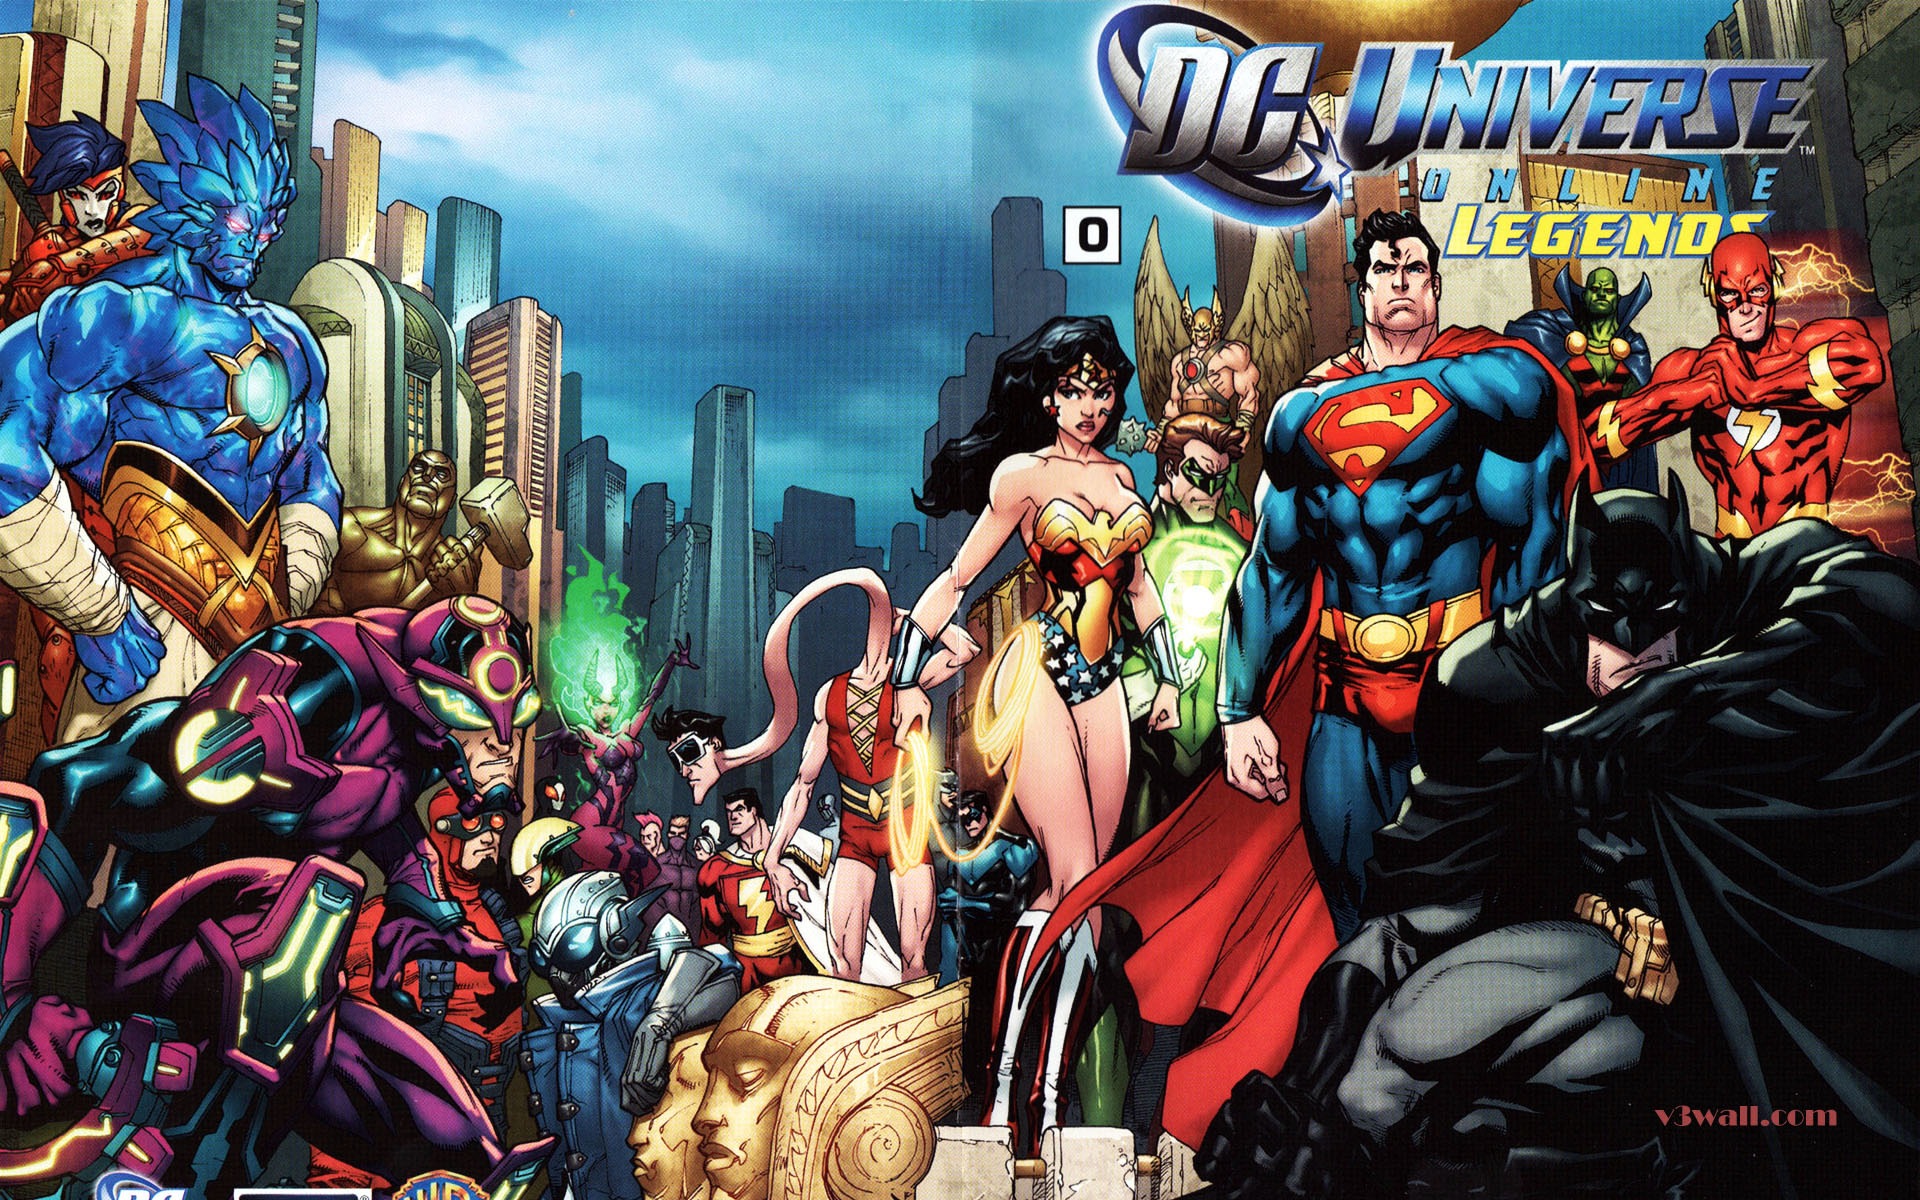 DC Universe Online HD game wallpapers #24 - 1920x1200